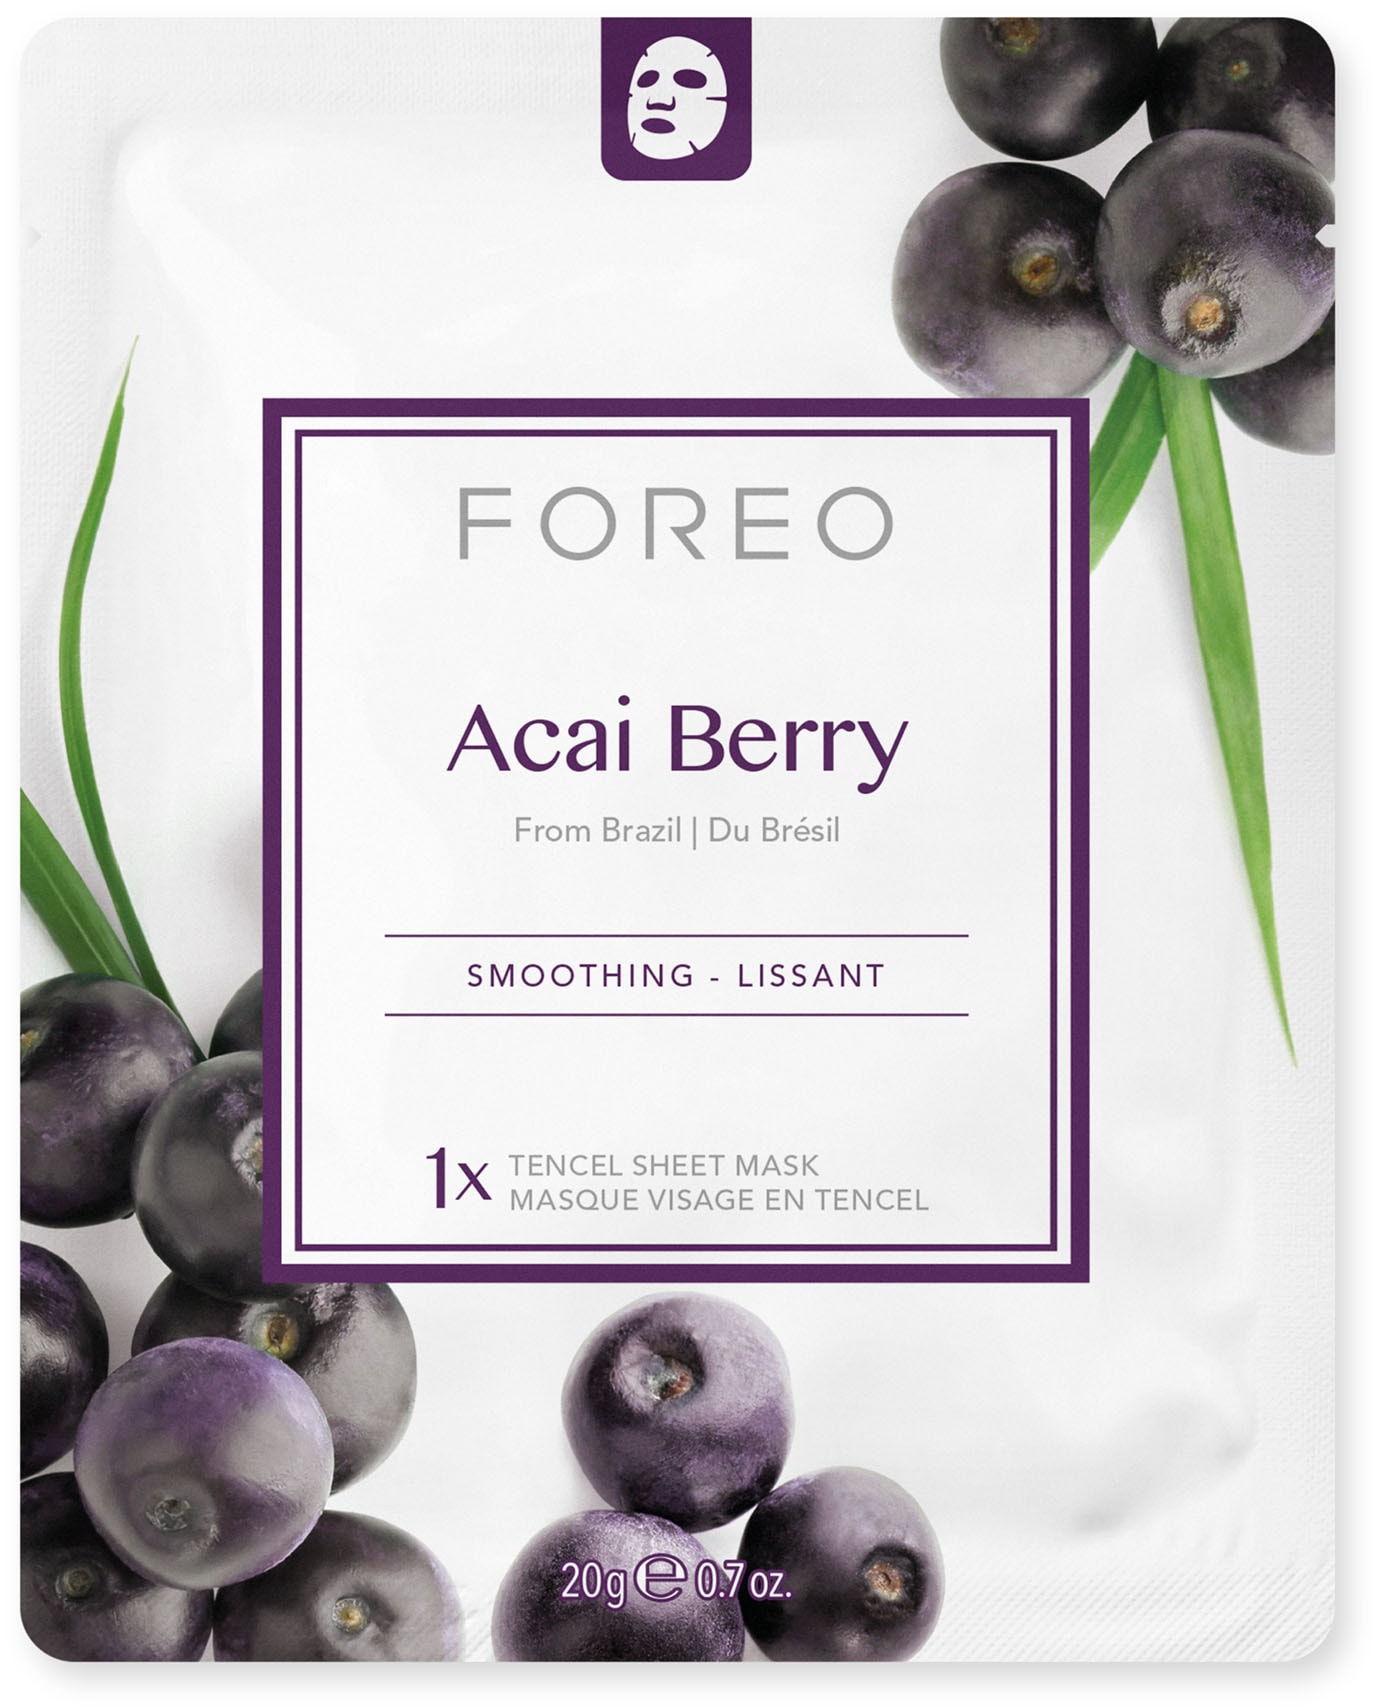 FOREO Gesichtsmaske »Farm To Face Collection Sheet Masks Acai Berry«, (3 tlg.)